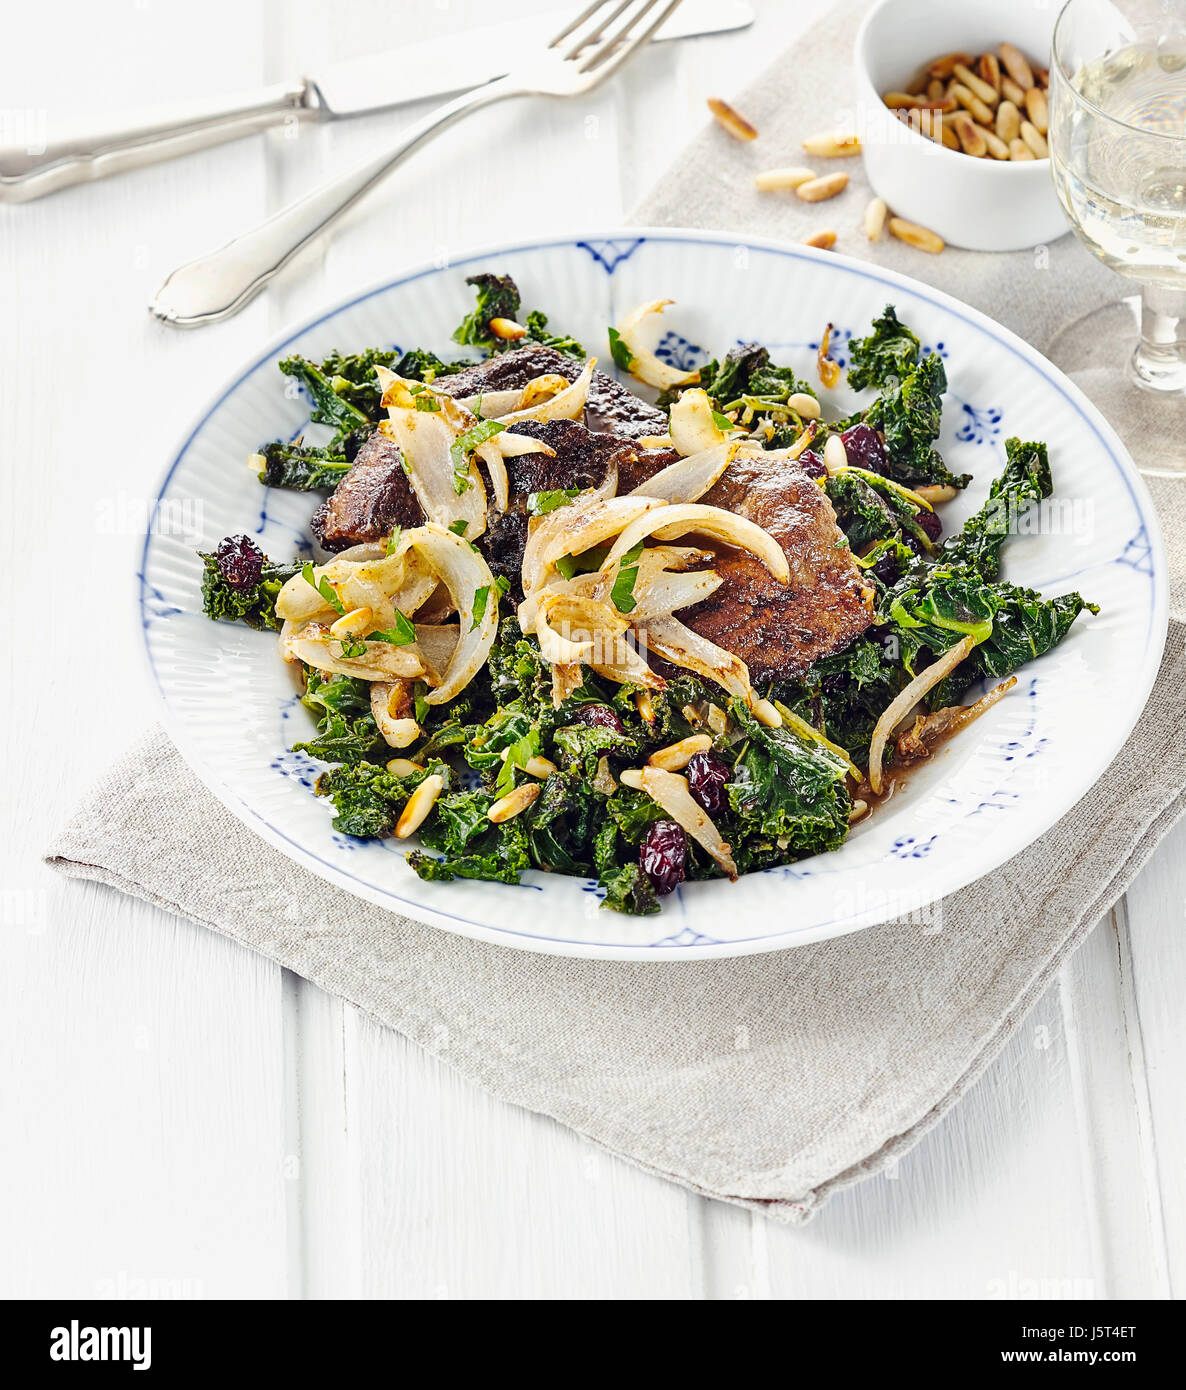 Liver of veal with kale and onions Stock Photo